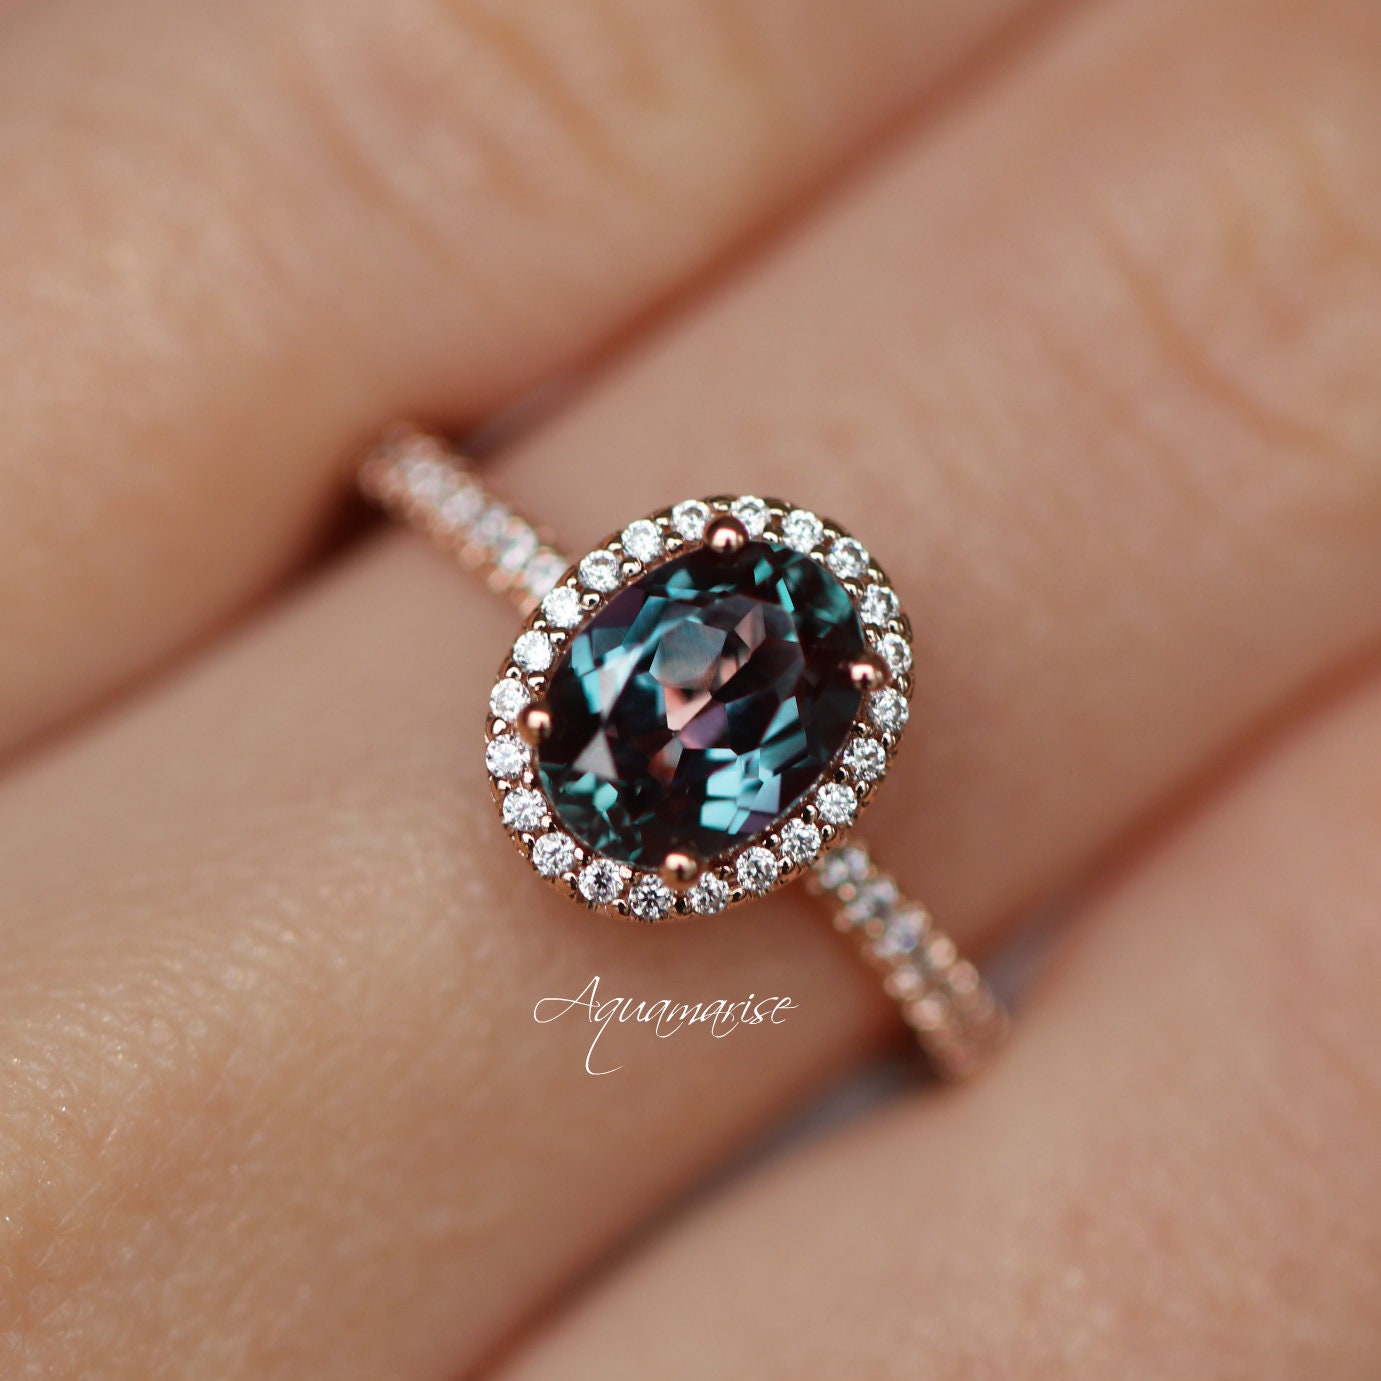 Iris Teal & Purple Oval Alexandrite Engagement Ring- 14K Solid Rose Gold